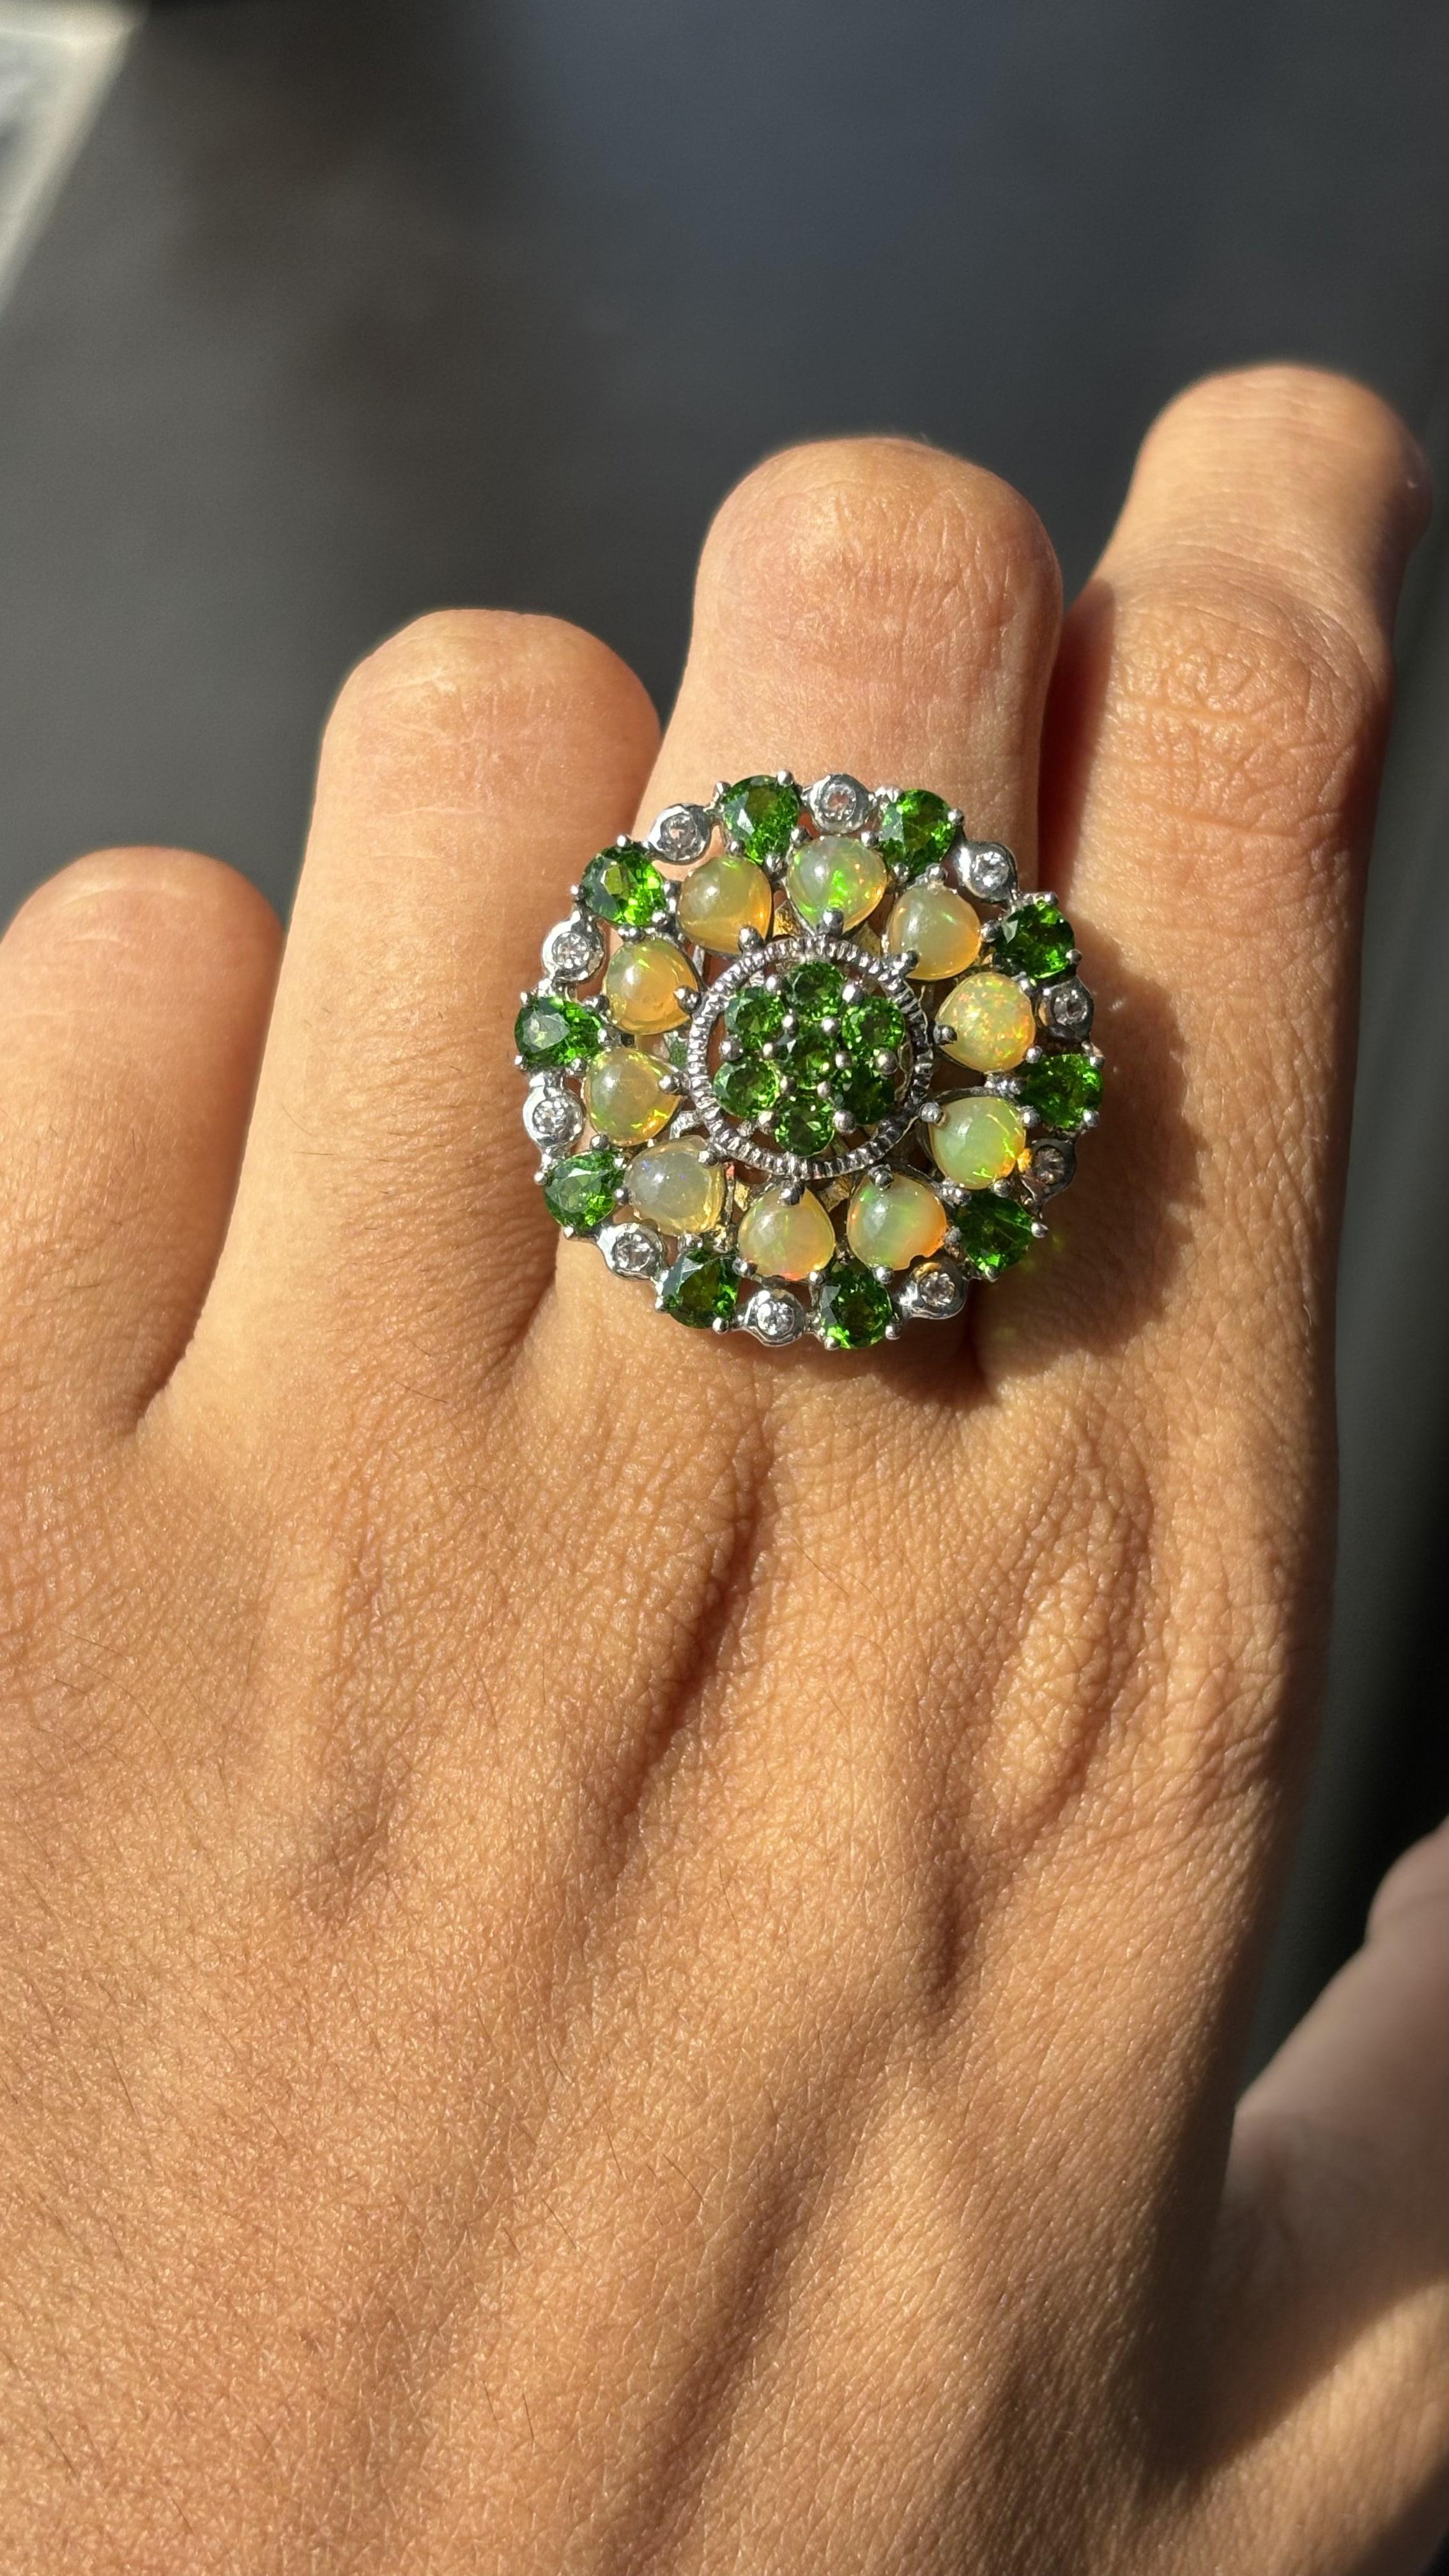 Antique circa 1900s Diopside, Opal & White Topaz Fancy Cocktail Ring in Silver For Sale 1